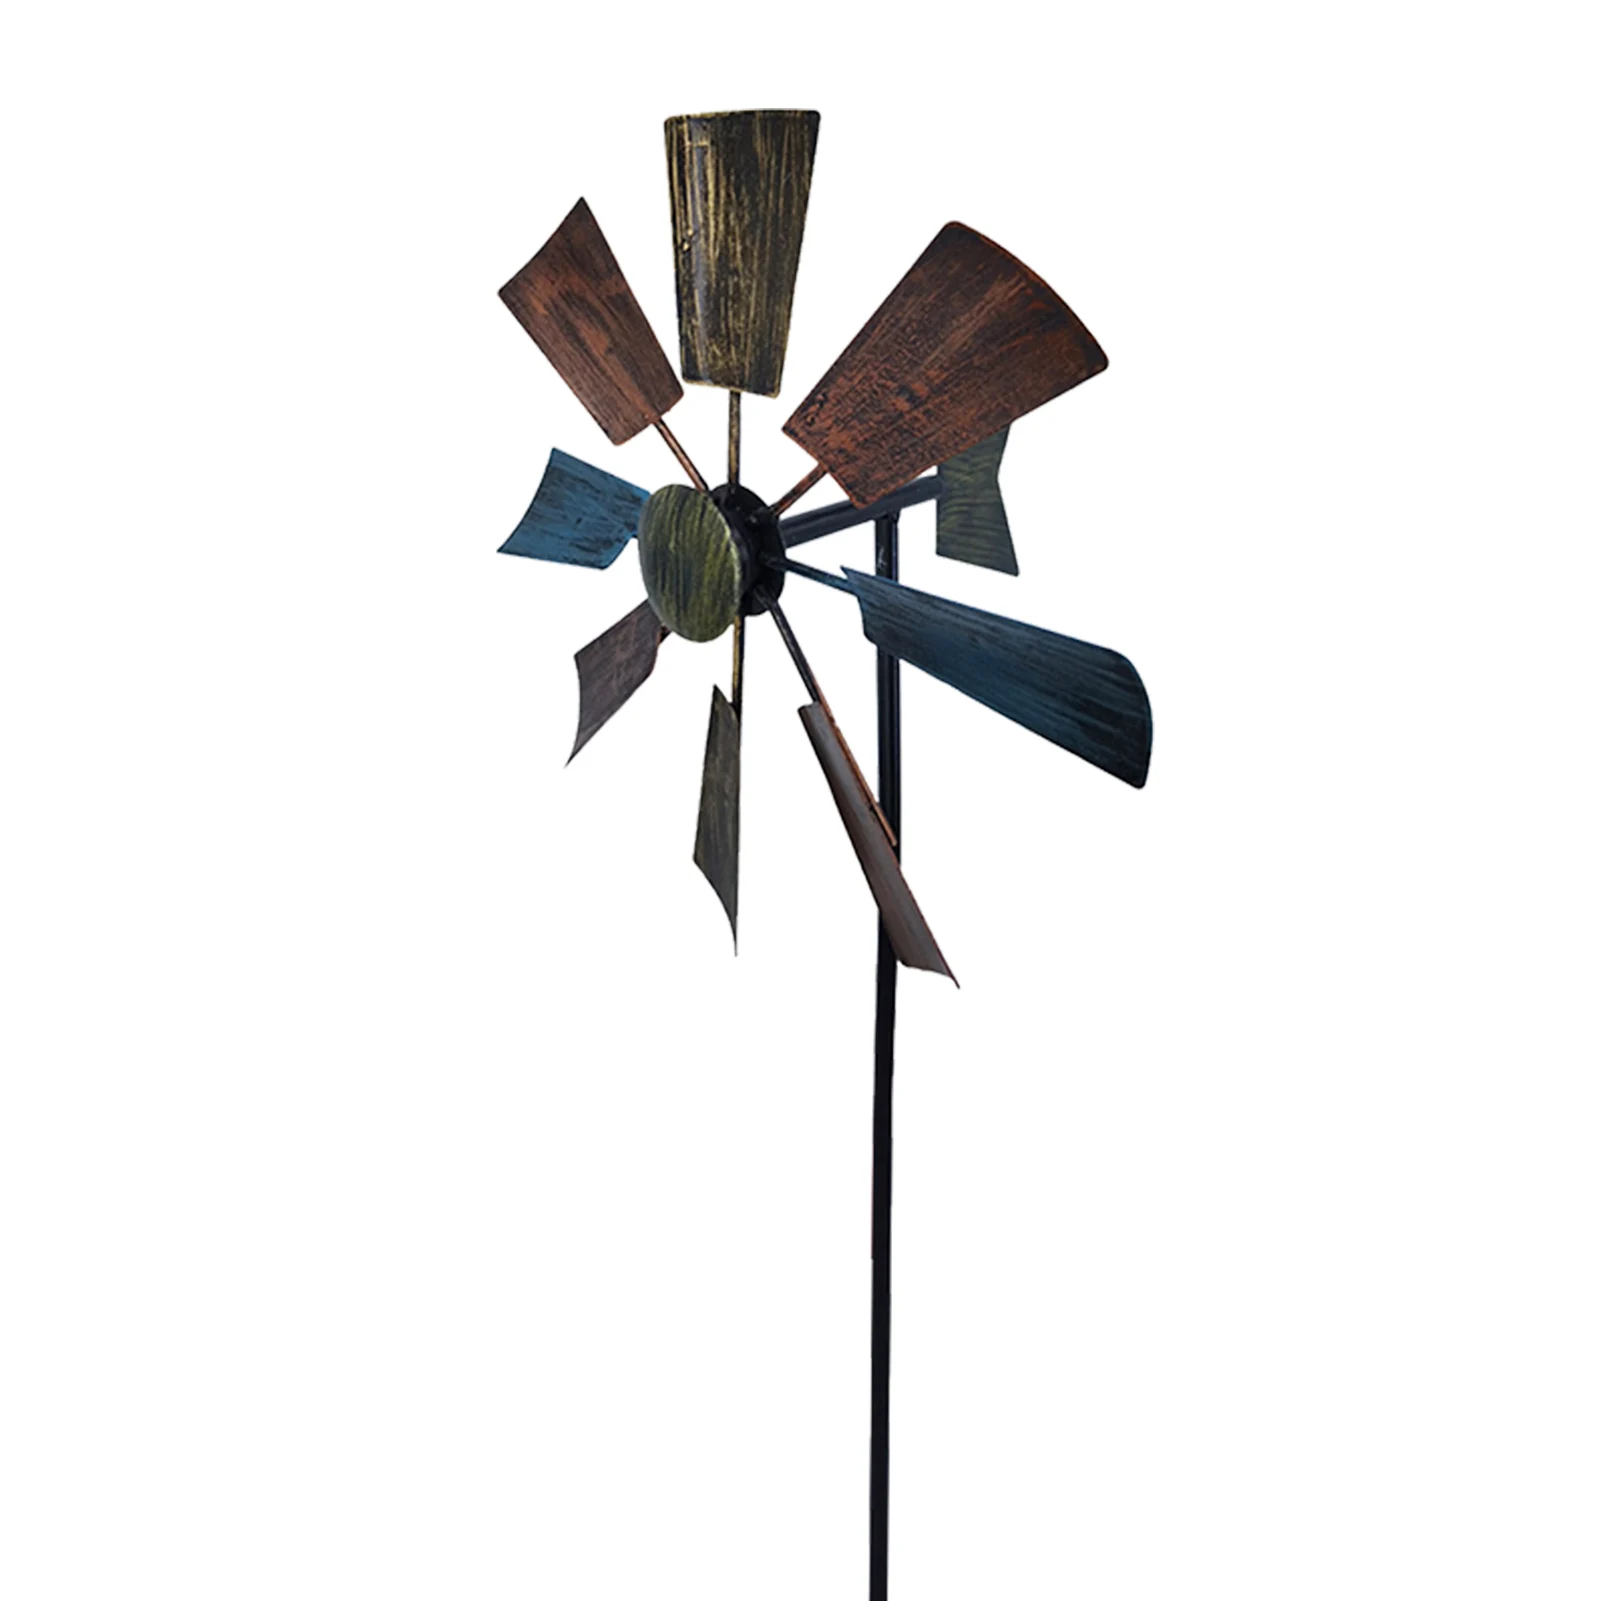 

Backyard Metal Wind Spinner Easy Install Gift Outdoor Decor With Stake Garden Windmill Patio Lawn Ornament DIY Tool Whirligig